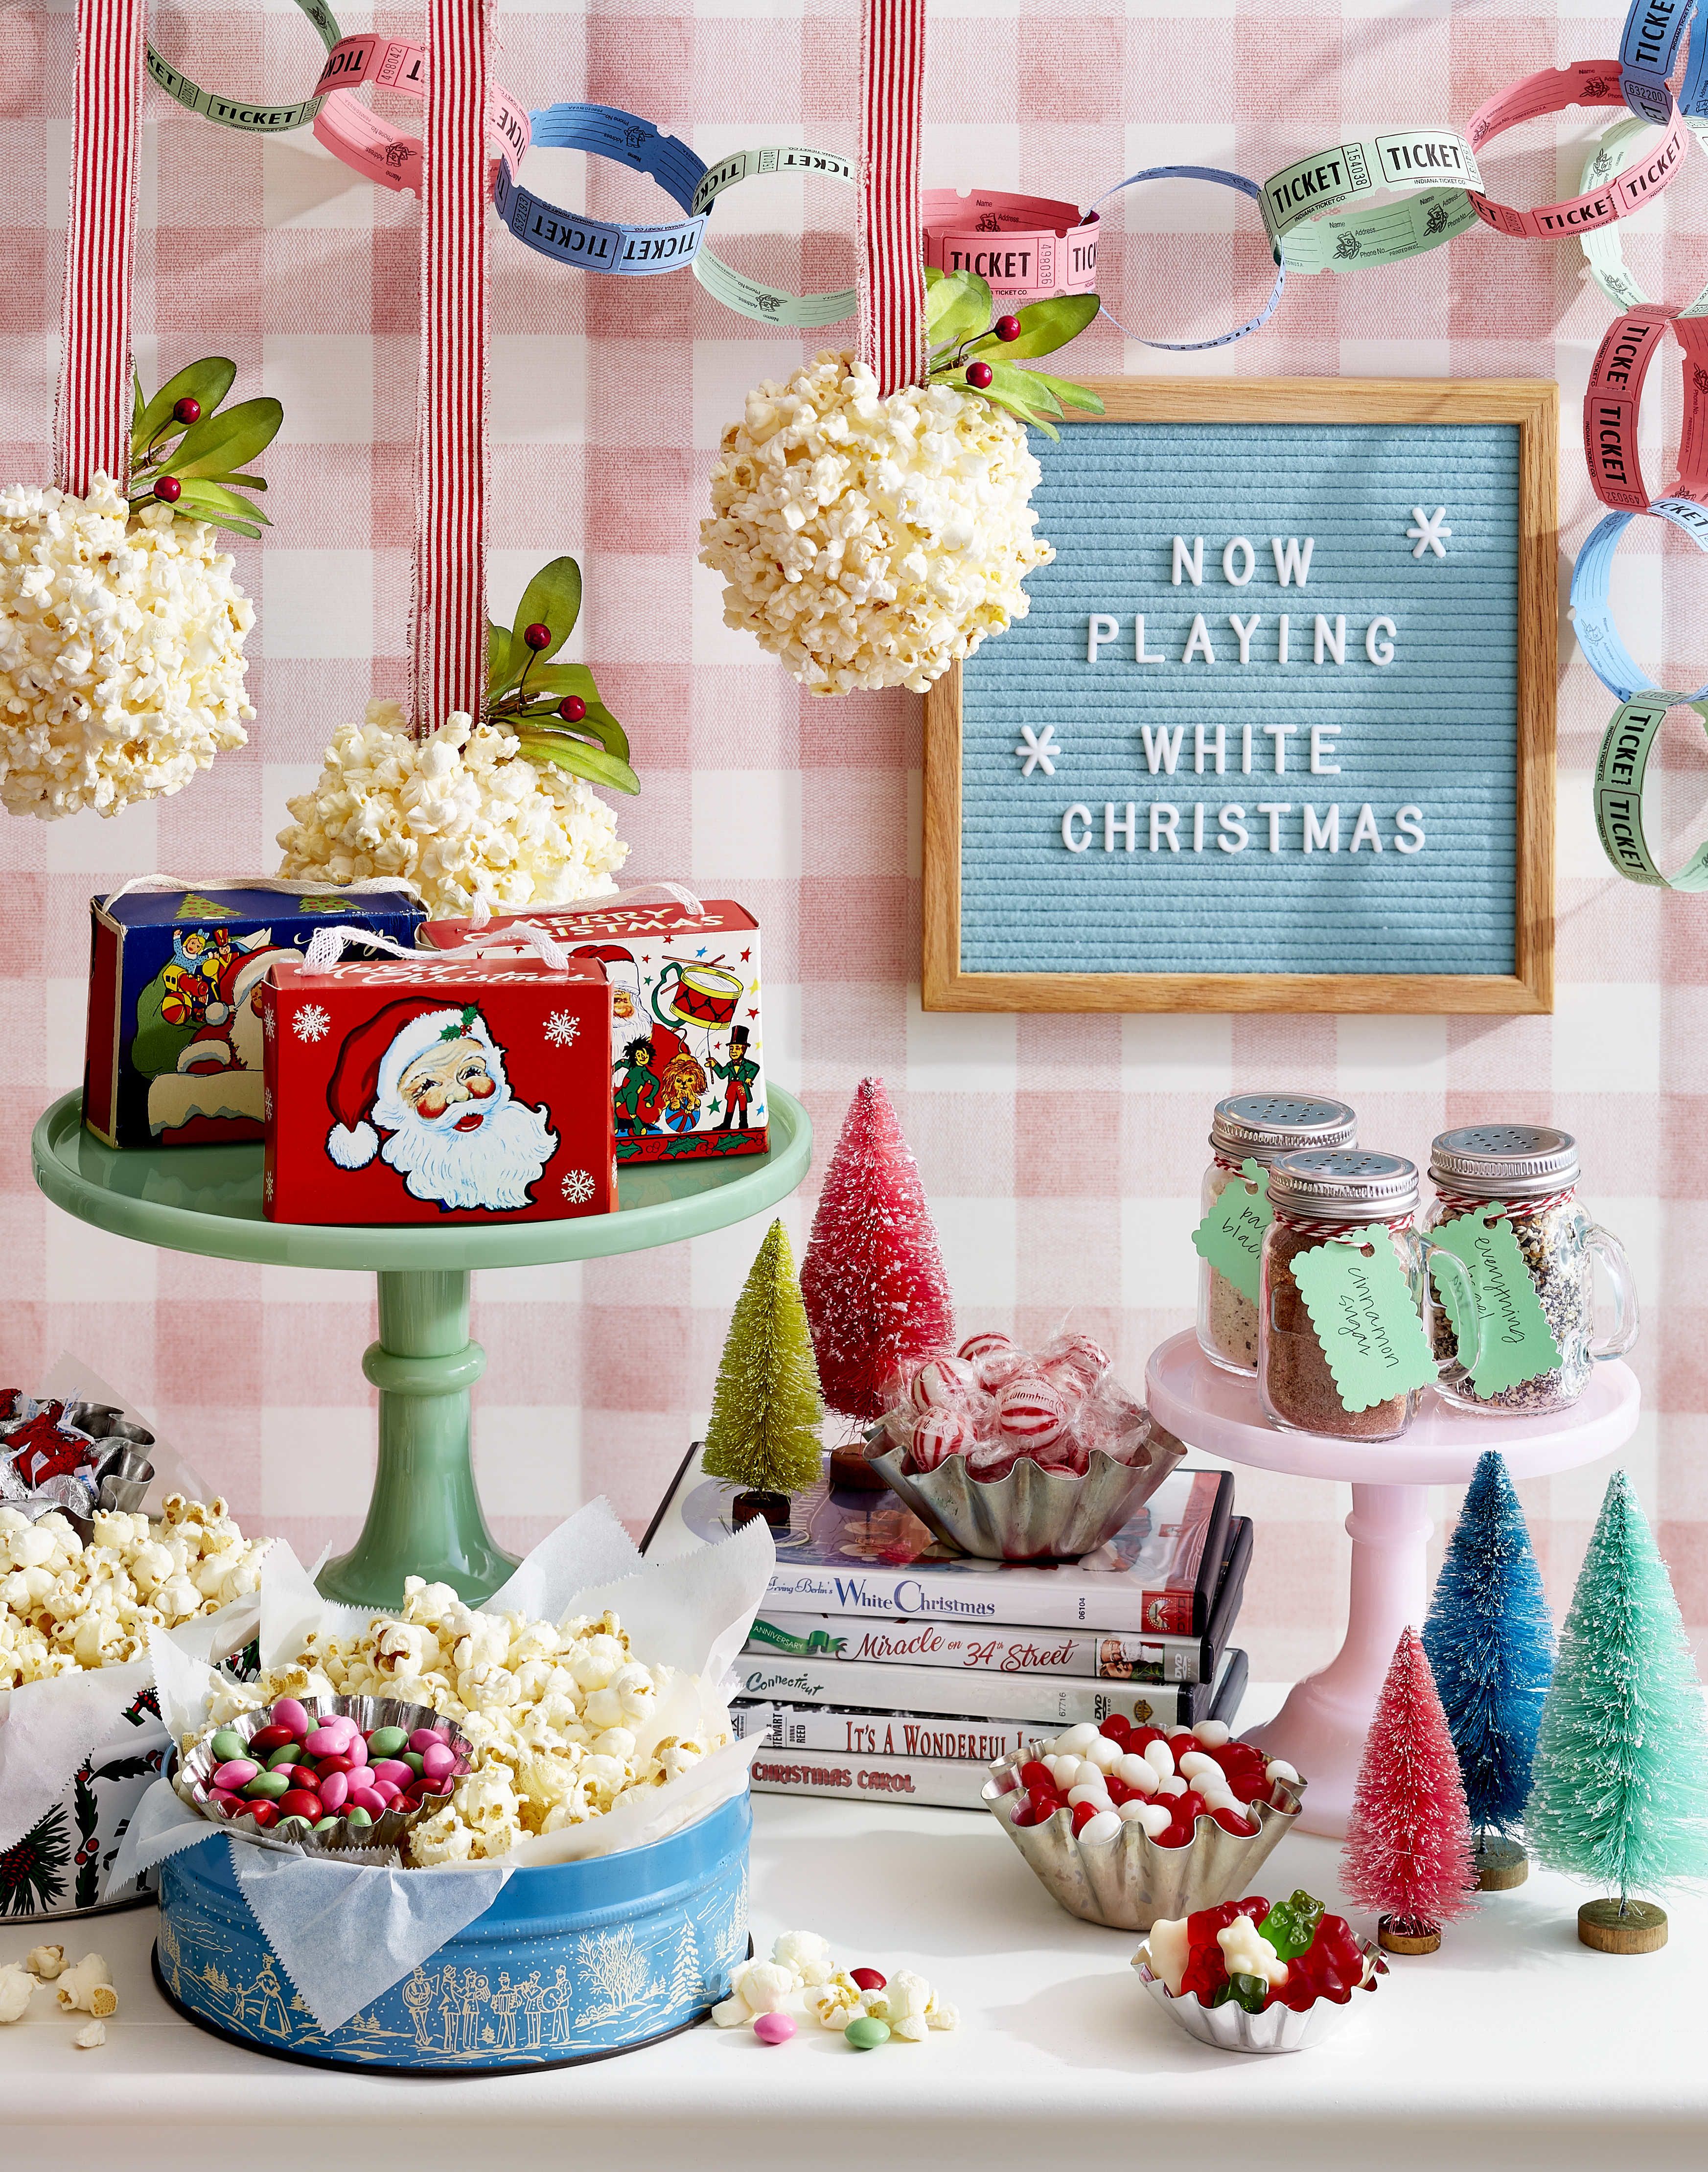 38 Country Christmas Decorating Ideas - How to Celebrate Christmas ...